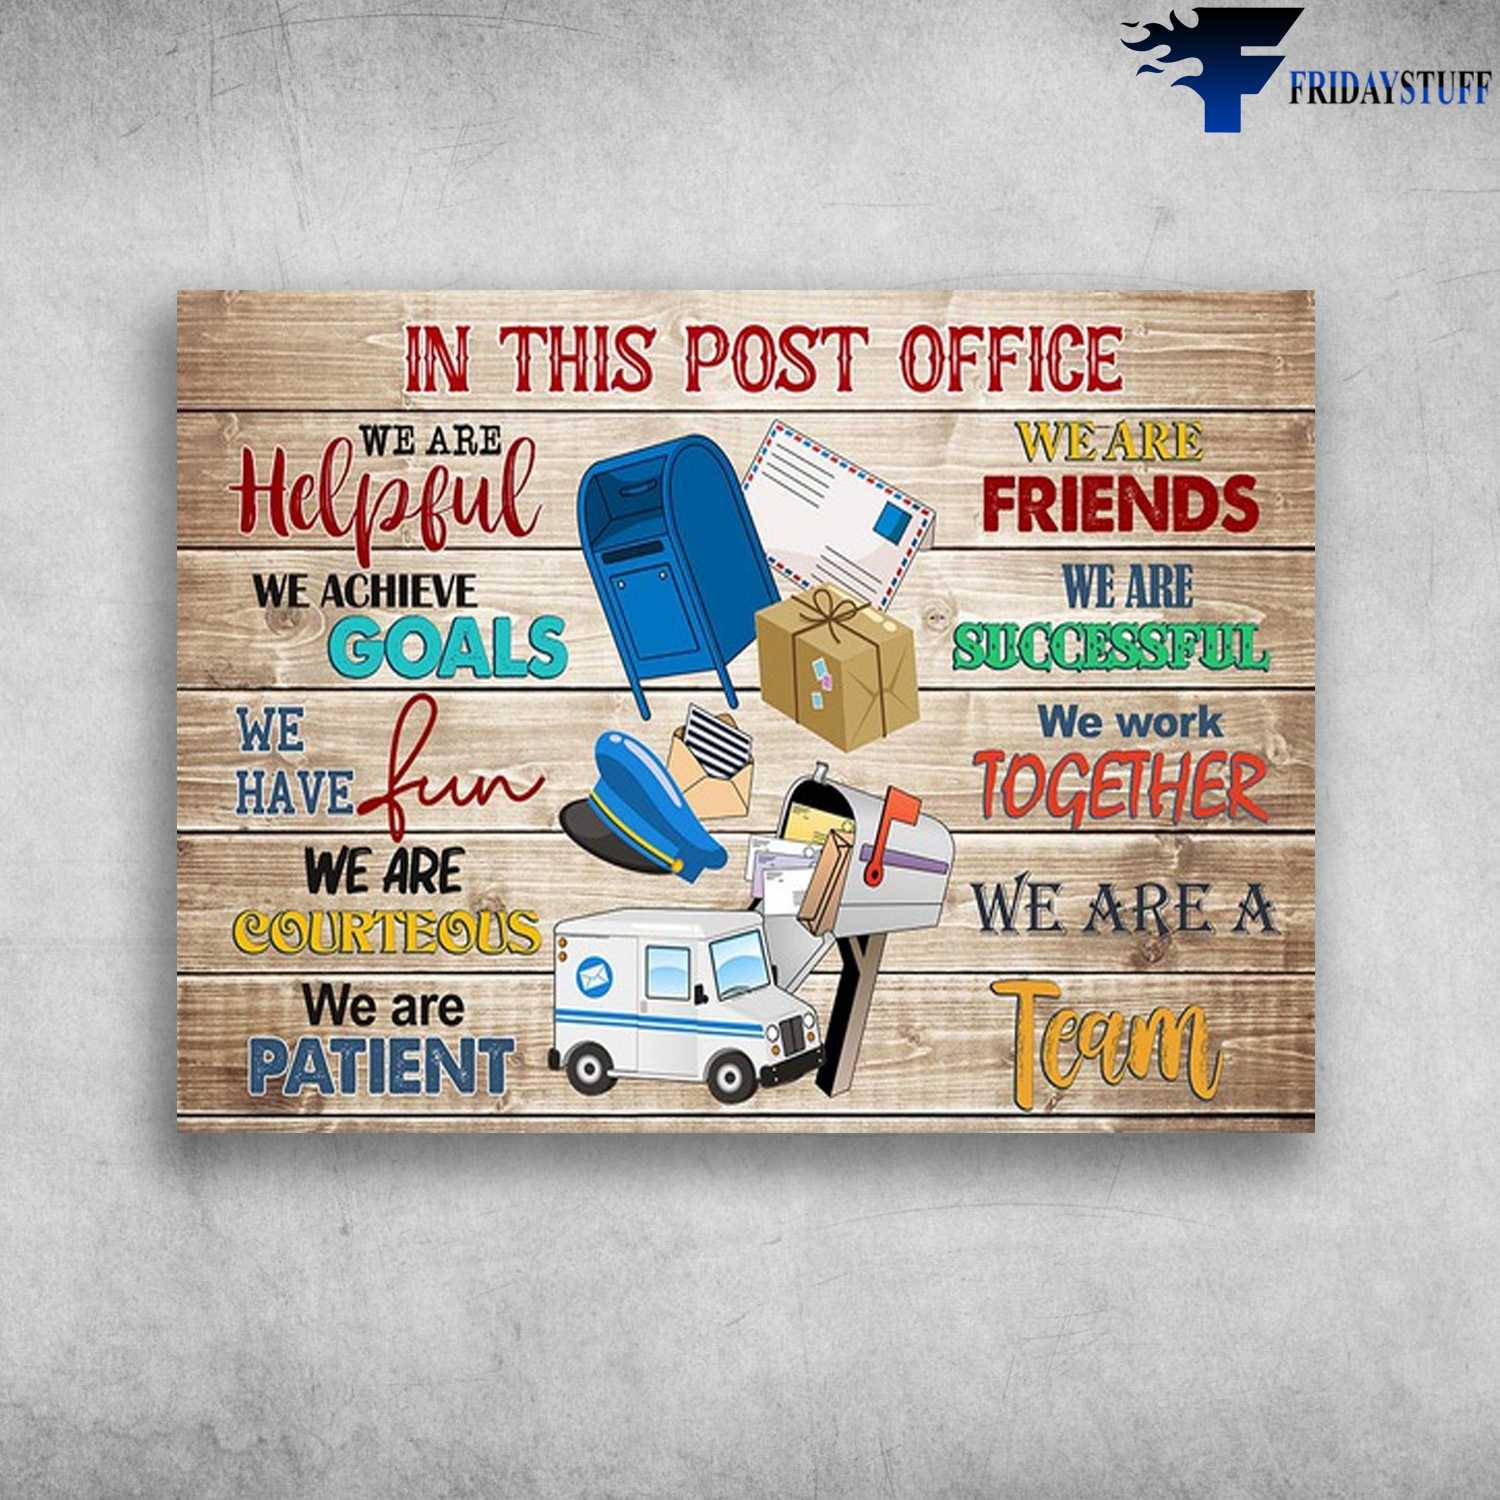 Post Office Canvas - In This Post Office, We Are Helpful, We Achive Goals, We Are Friends, We Are Successul, We Have Fun, We Work Together